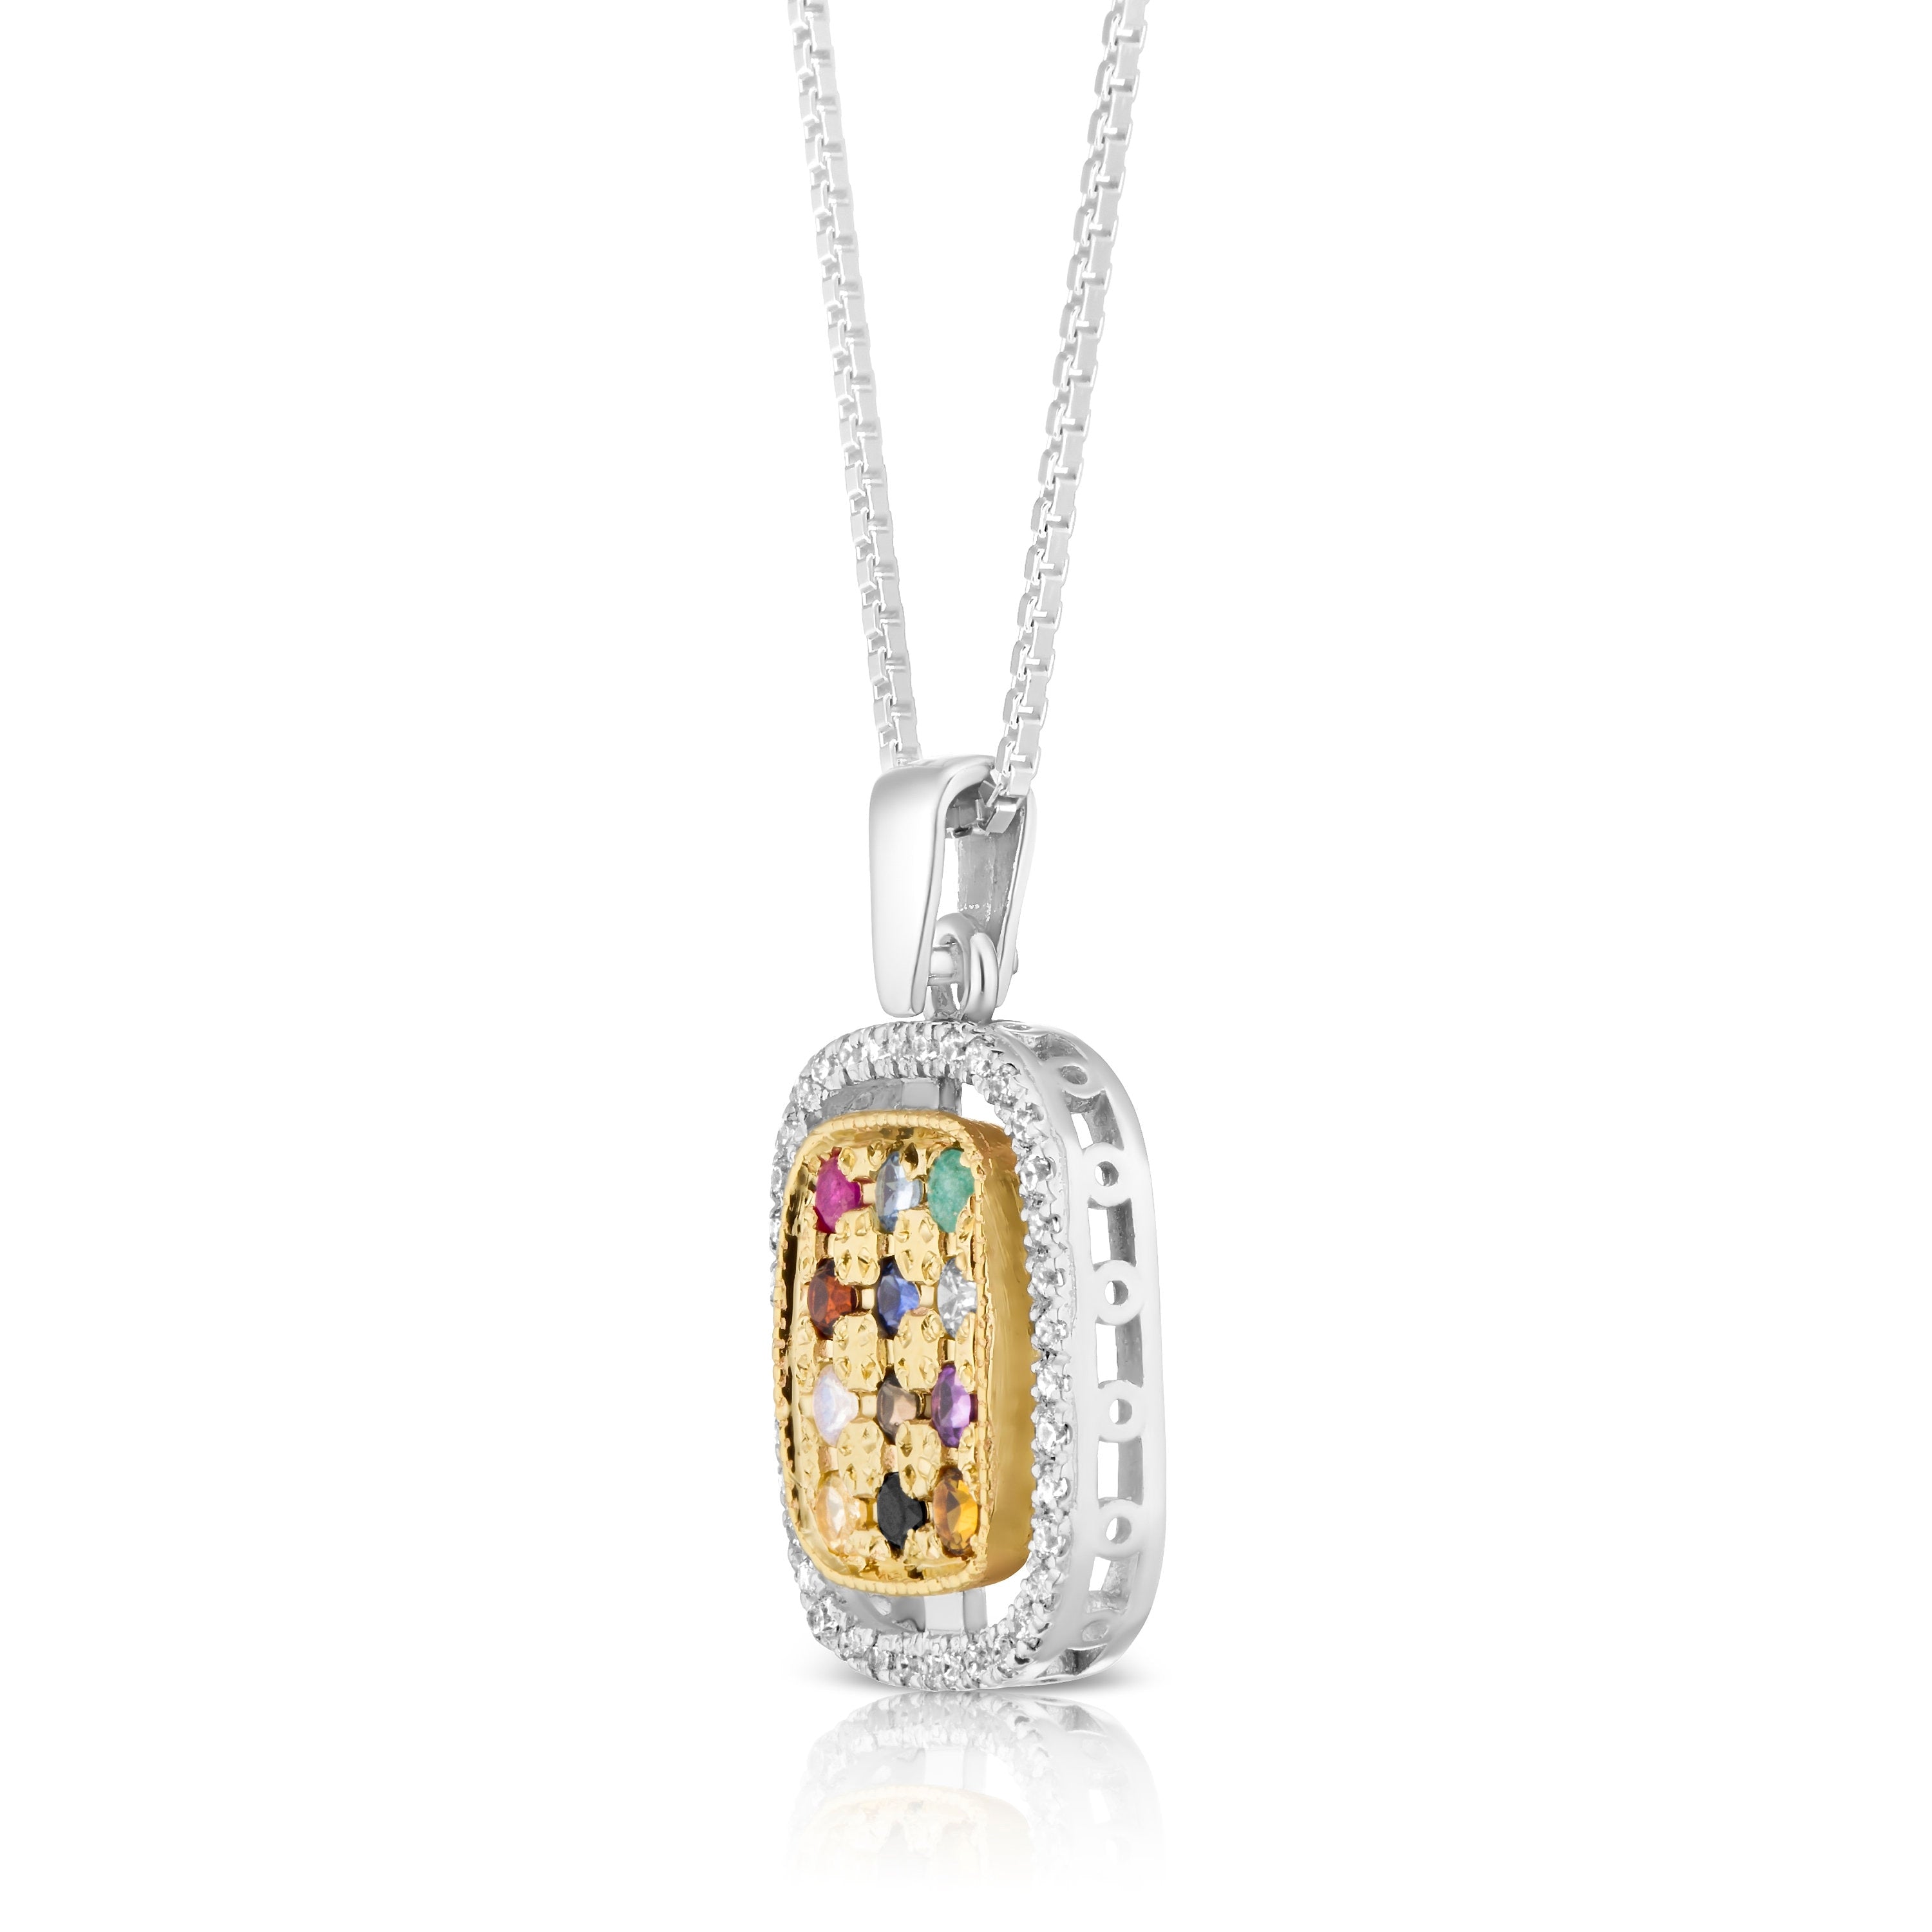 Hoshen Genuine Gemstones and Diamond Pendant Necklace: 925 Sterling Silver and 9K Gold Breastplate Stones Necklace | Anniversary Gift